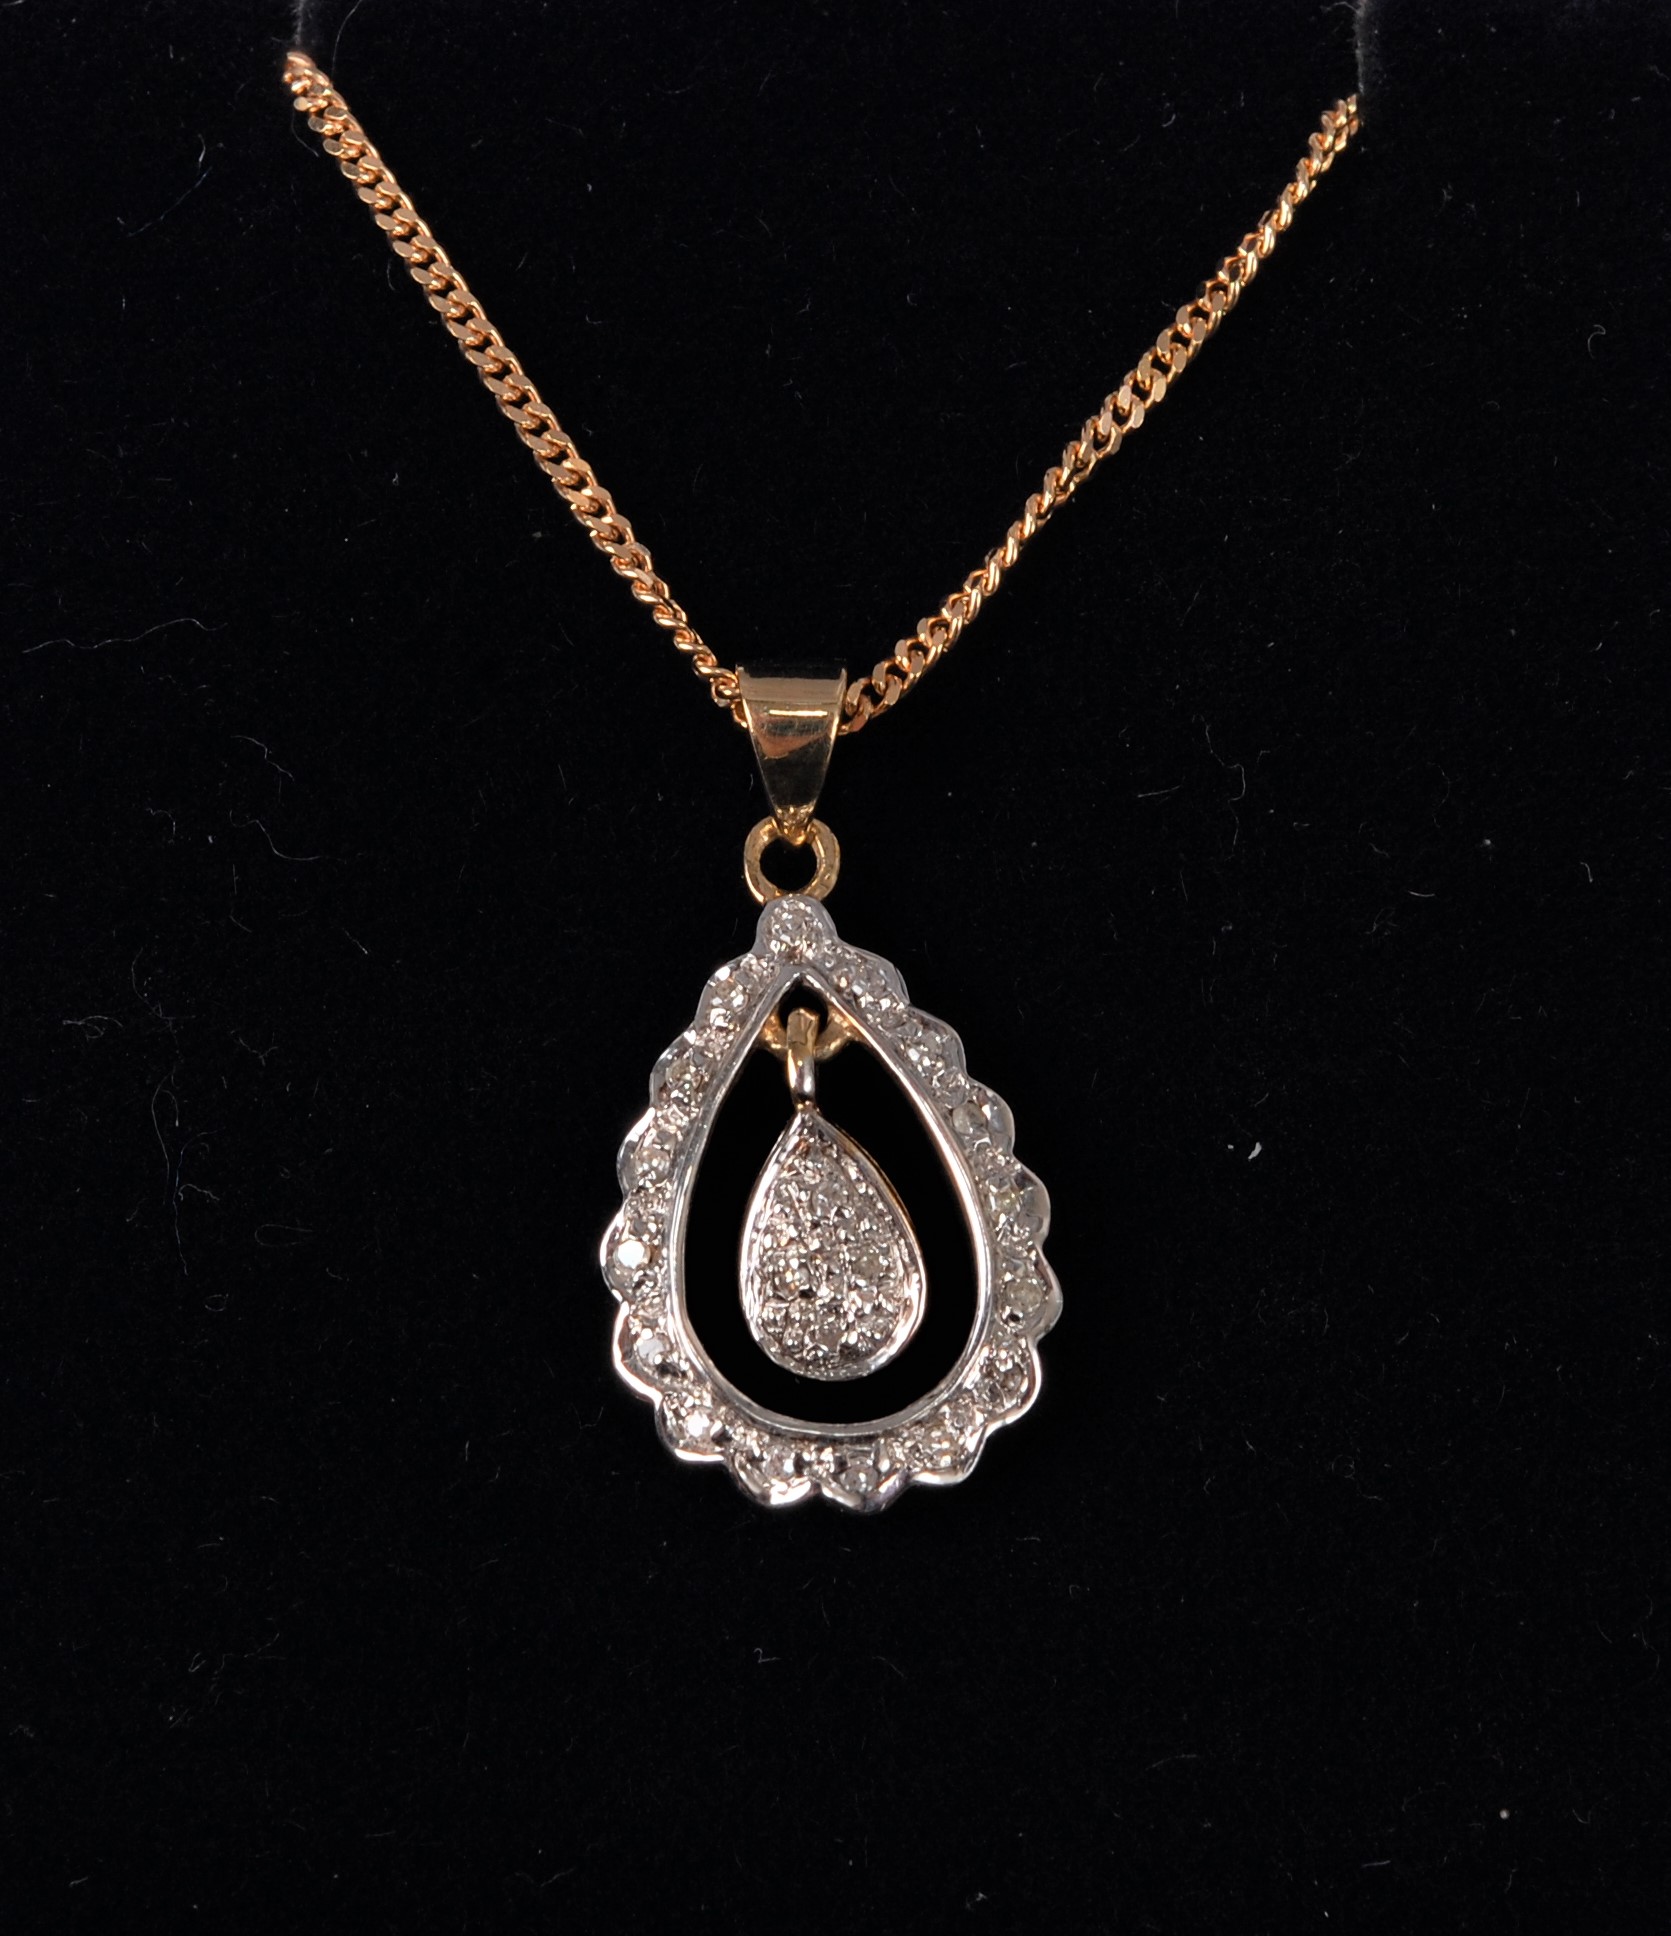 A 9ct diamond pendant, the open pear shaped pendant set with small round diamonds, in a white gold